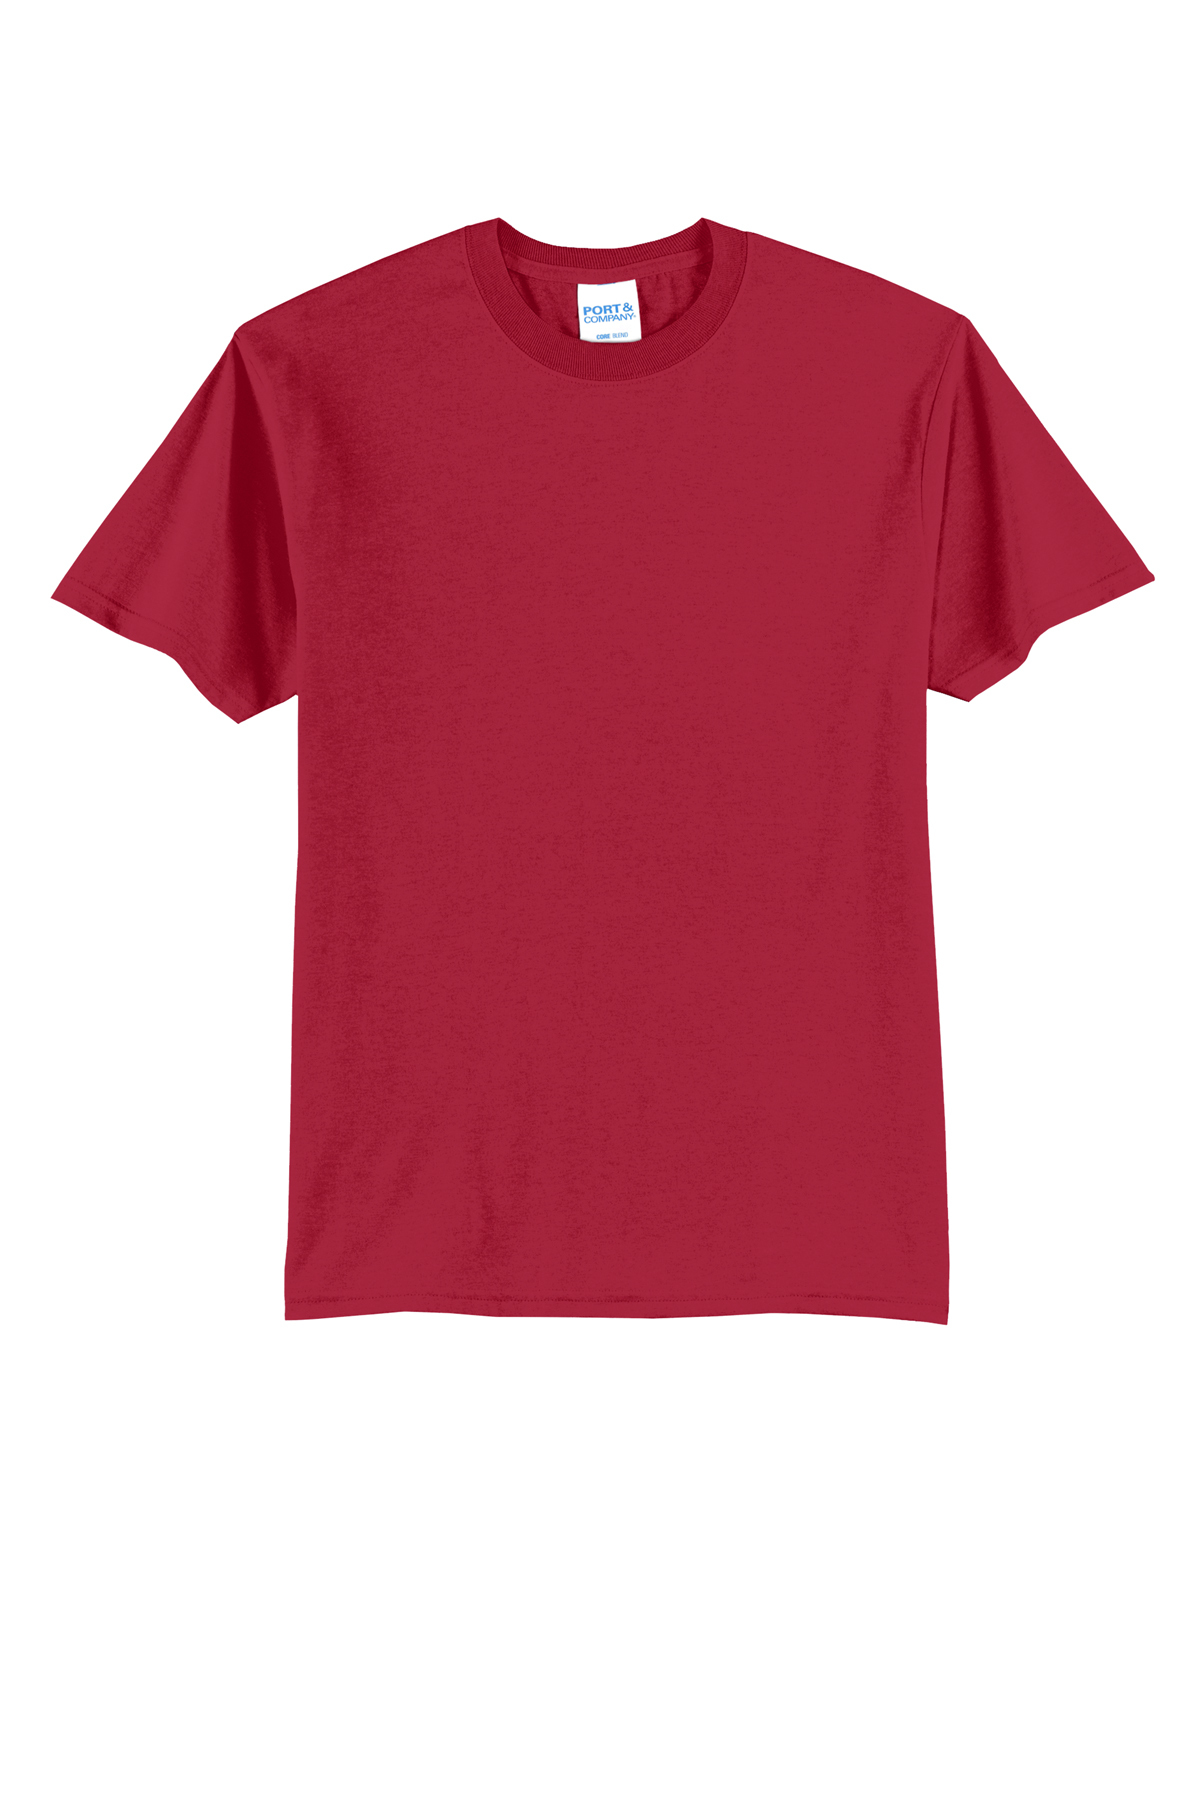 Port & Company Core Blend Tee, Product